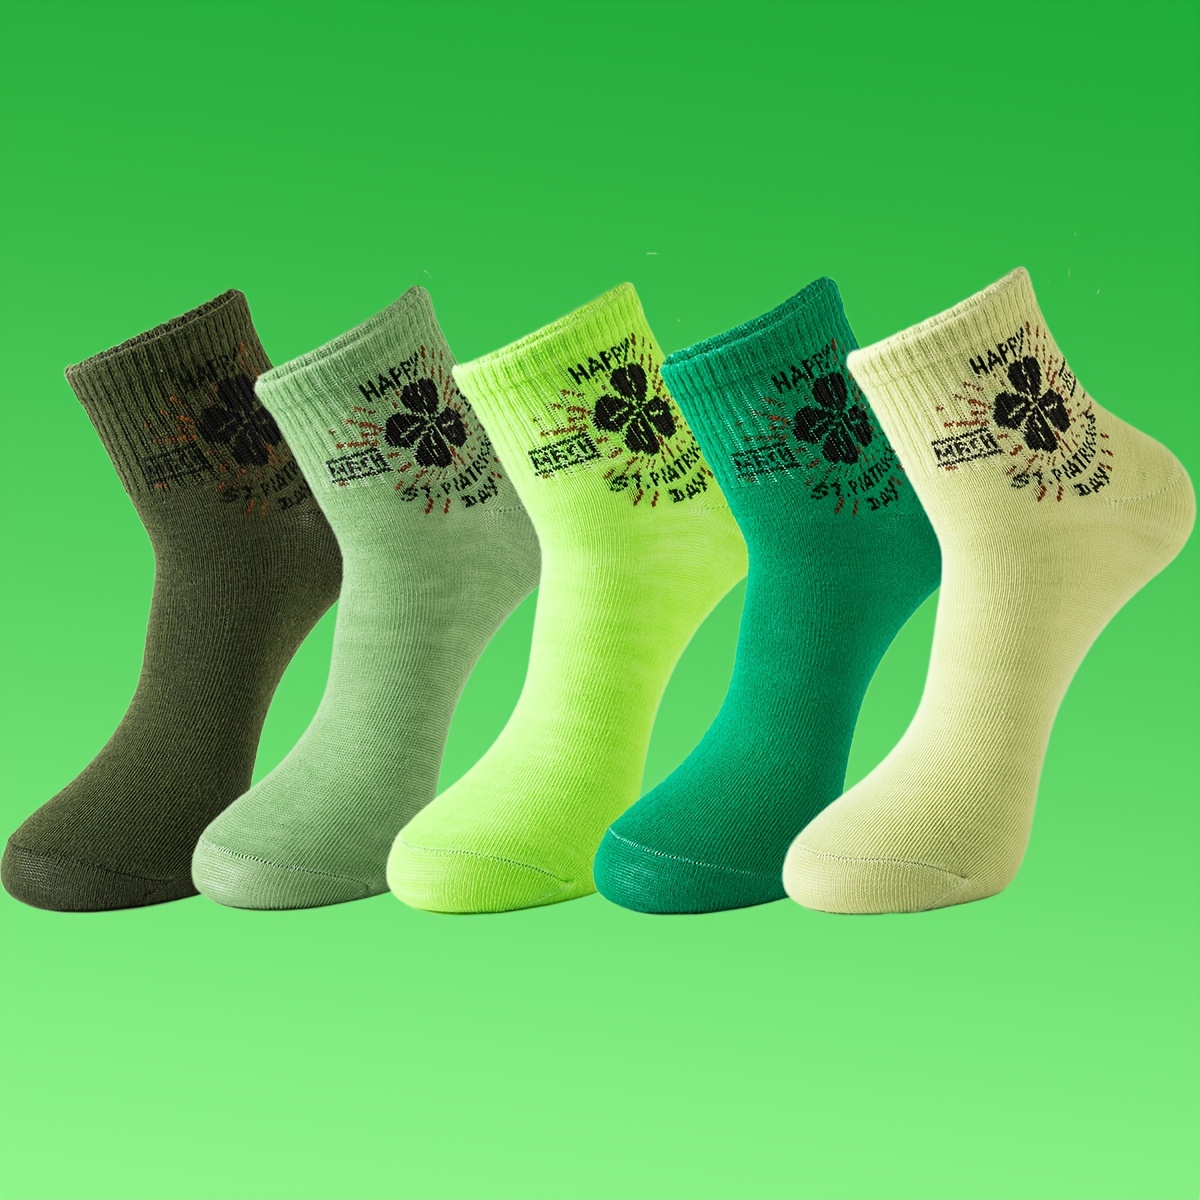 

5 Pairs Of Men's Trendy Saint Patrick Day Lucky Clover Pattern Crew Socks, Breathable Comfy Casual Unisex Socks For Men's Outdoor Wearing All Seasons Wearing